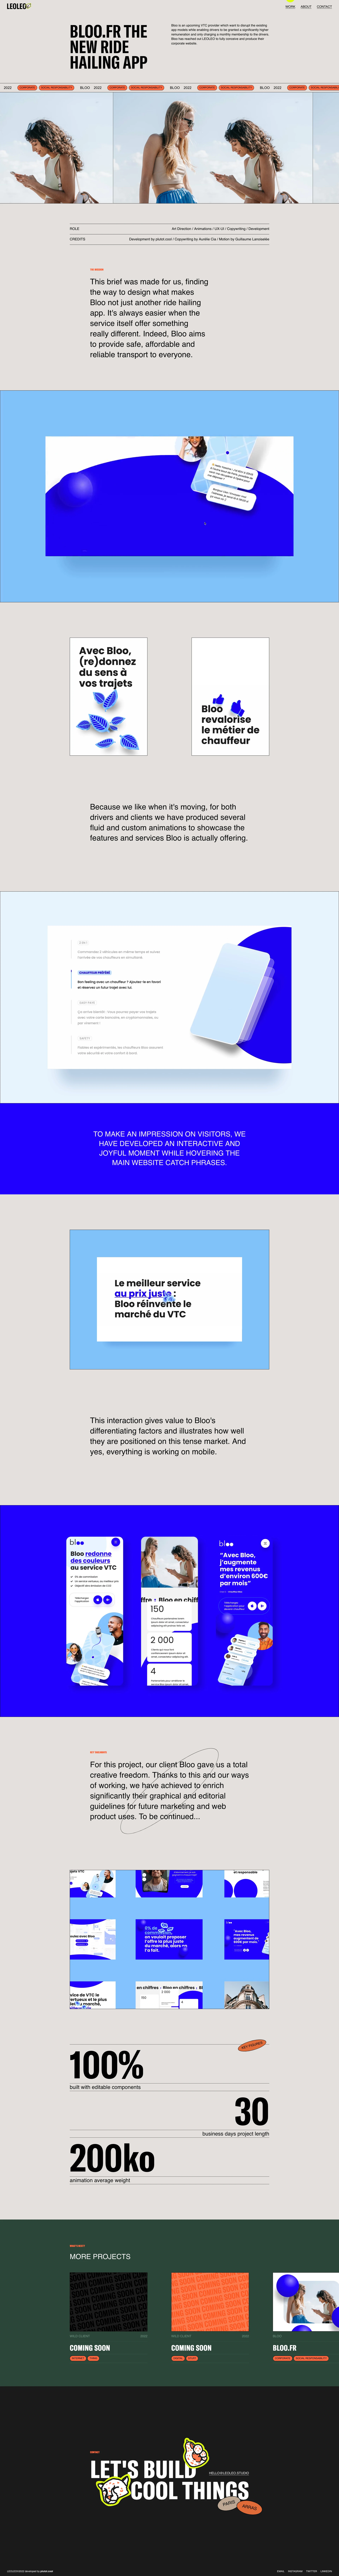 LEOLEO  Landing Page Example: We are a French digital design Studio. We have both good instinct and technical basis to create iconic brands on the most engaging platforms.